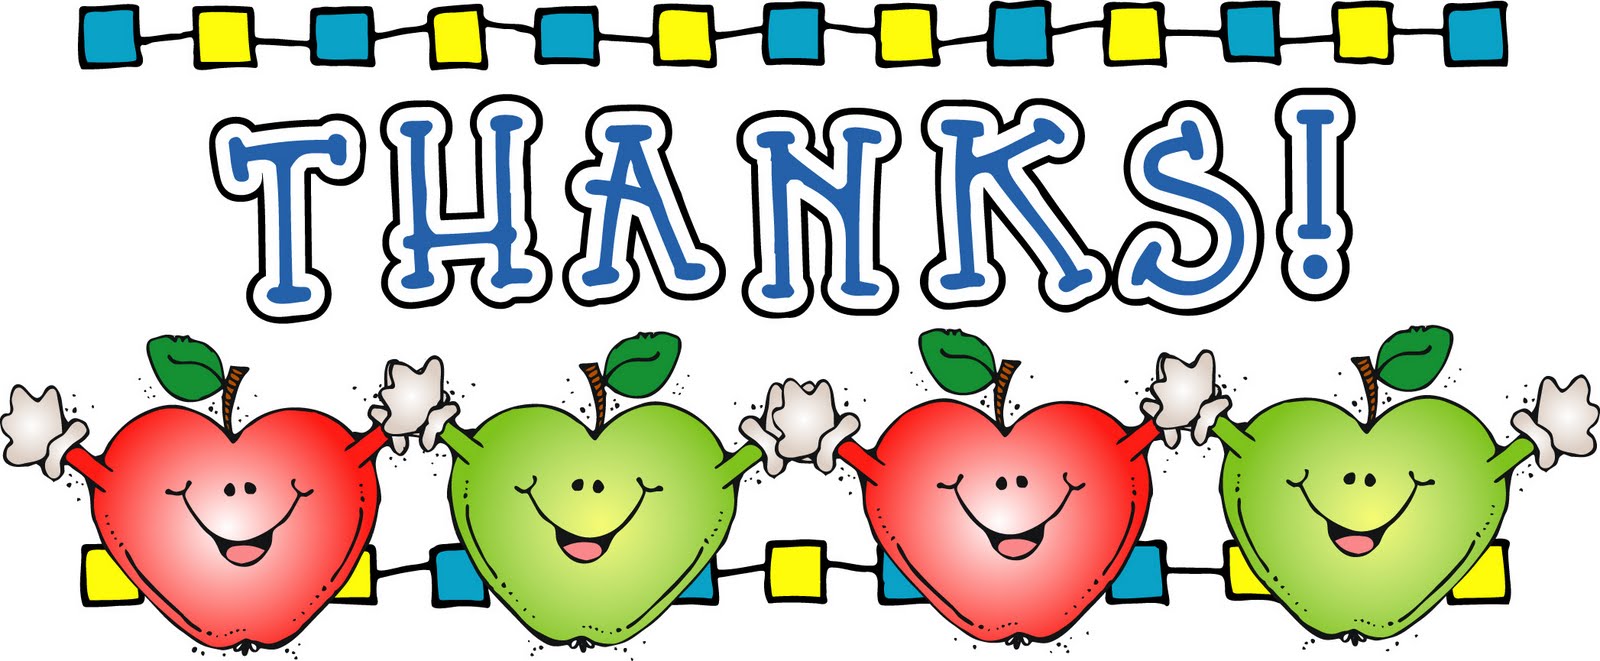 Clipart thank you clipart free download 2 – Gclipart.com